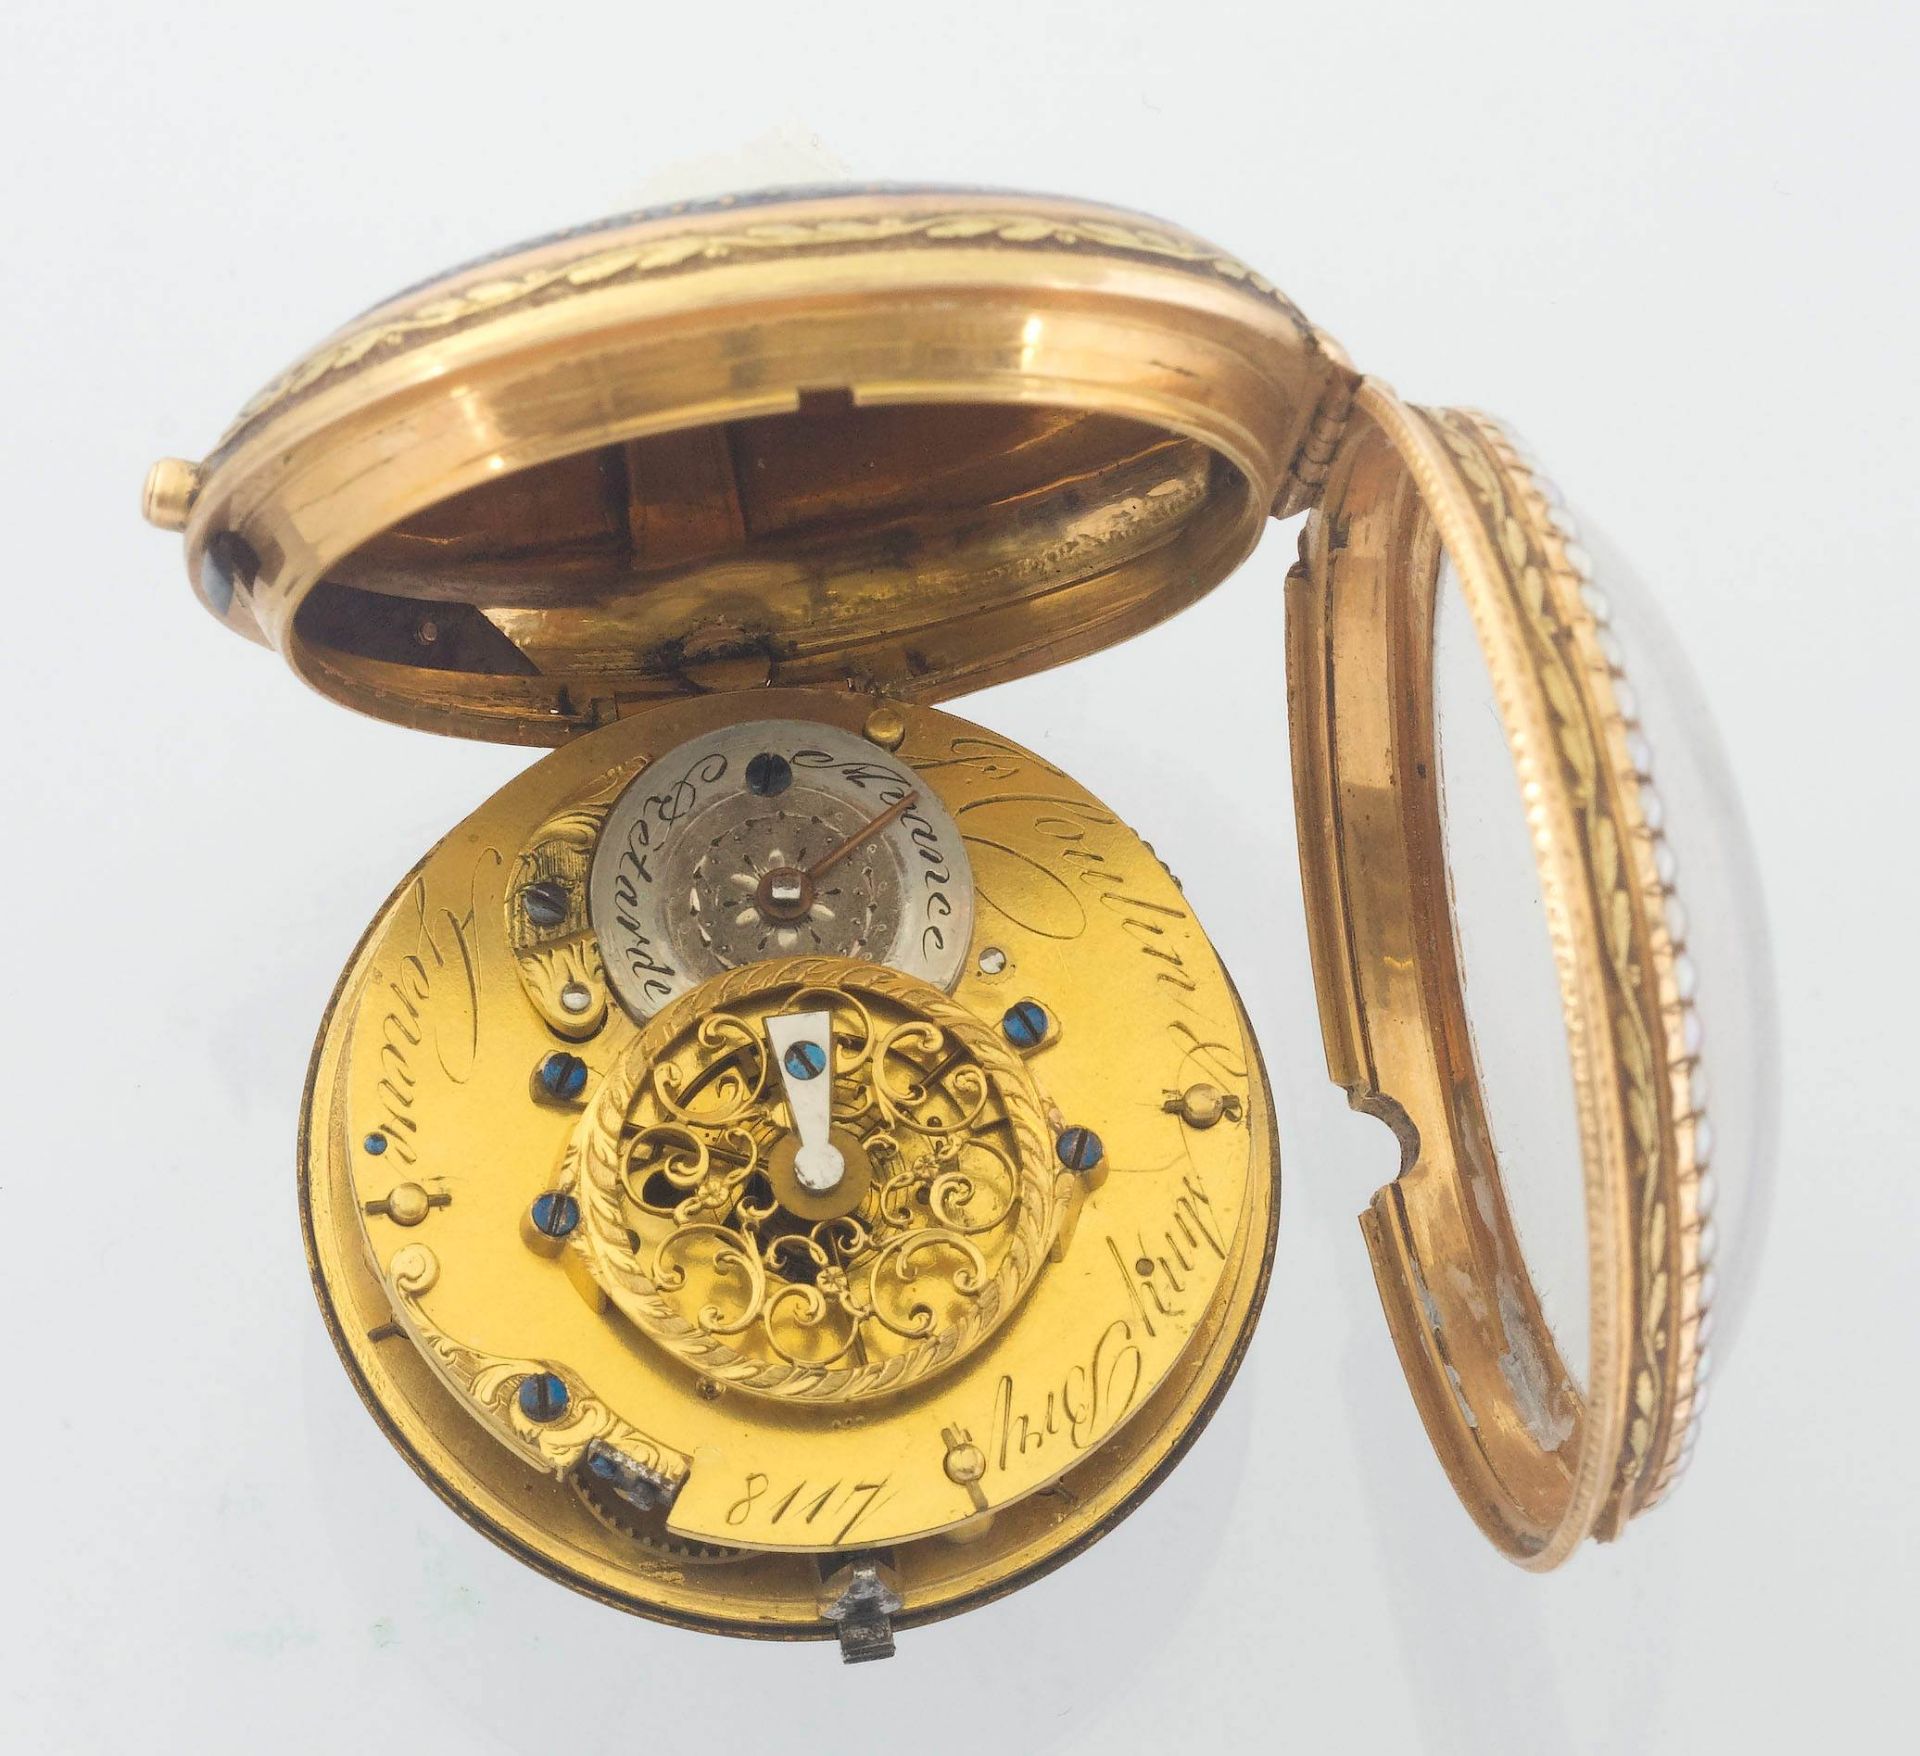 Jaques Coulin & Amy Bry, fine gold enamel pocket watch, ca. 1790 - Image 3 of 3